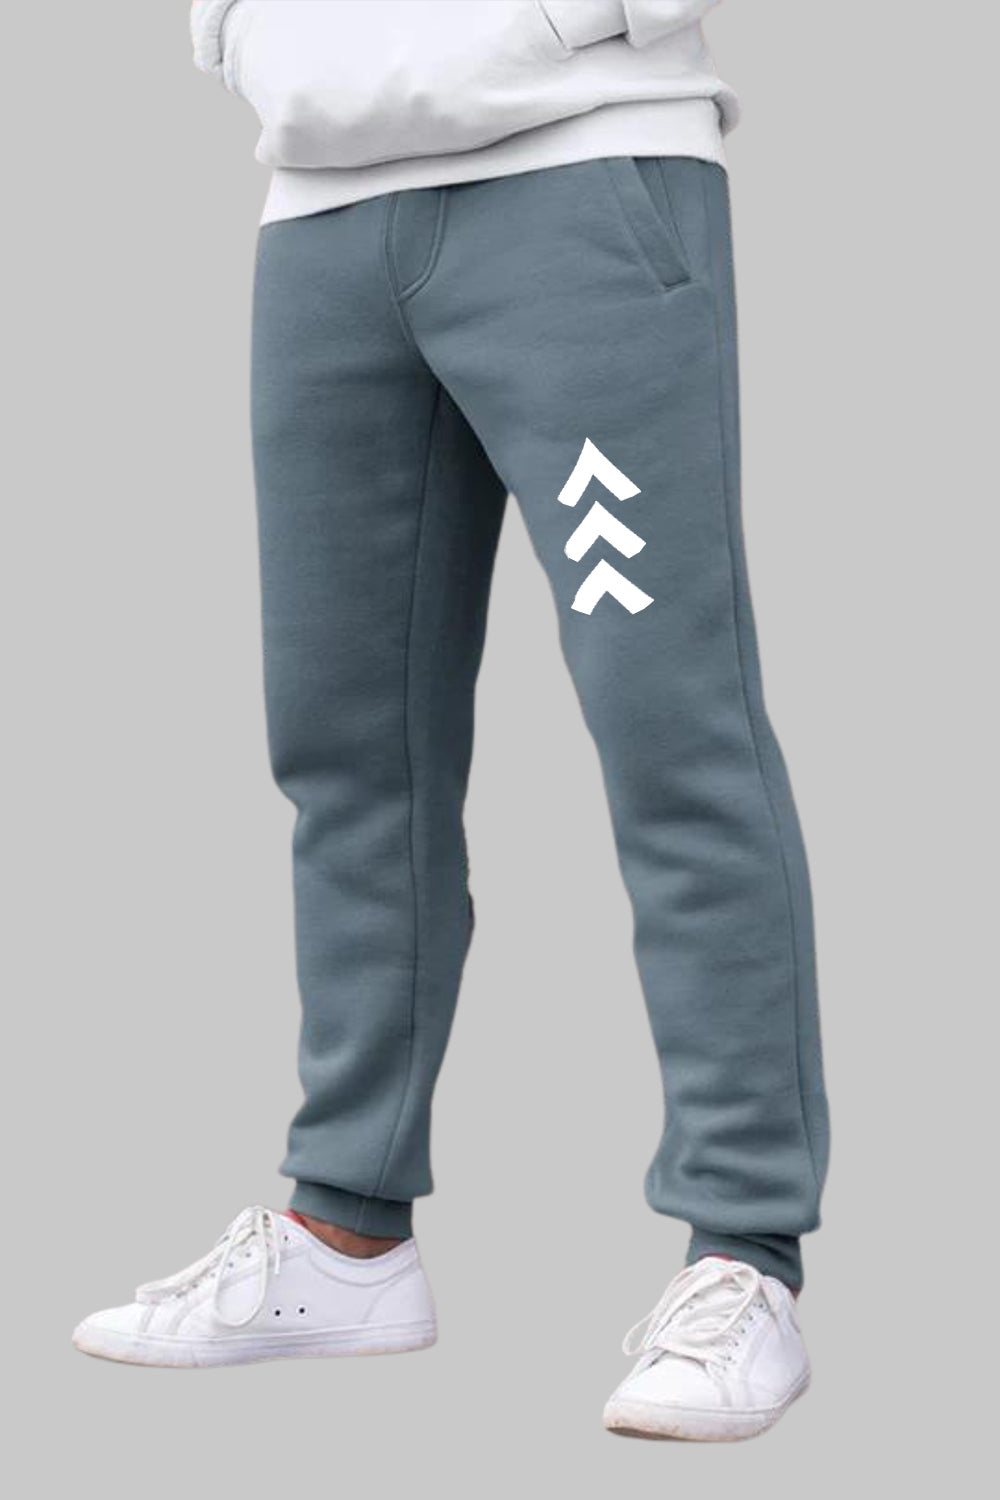 Arrow Graphic Printed Blue Grey Joggers